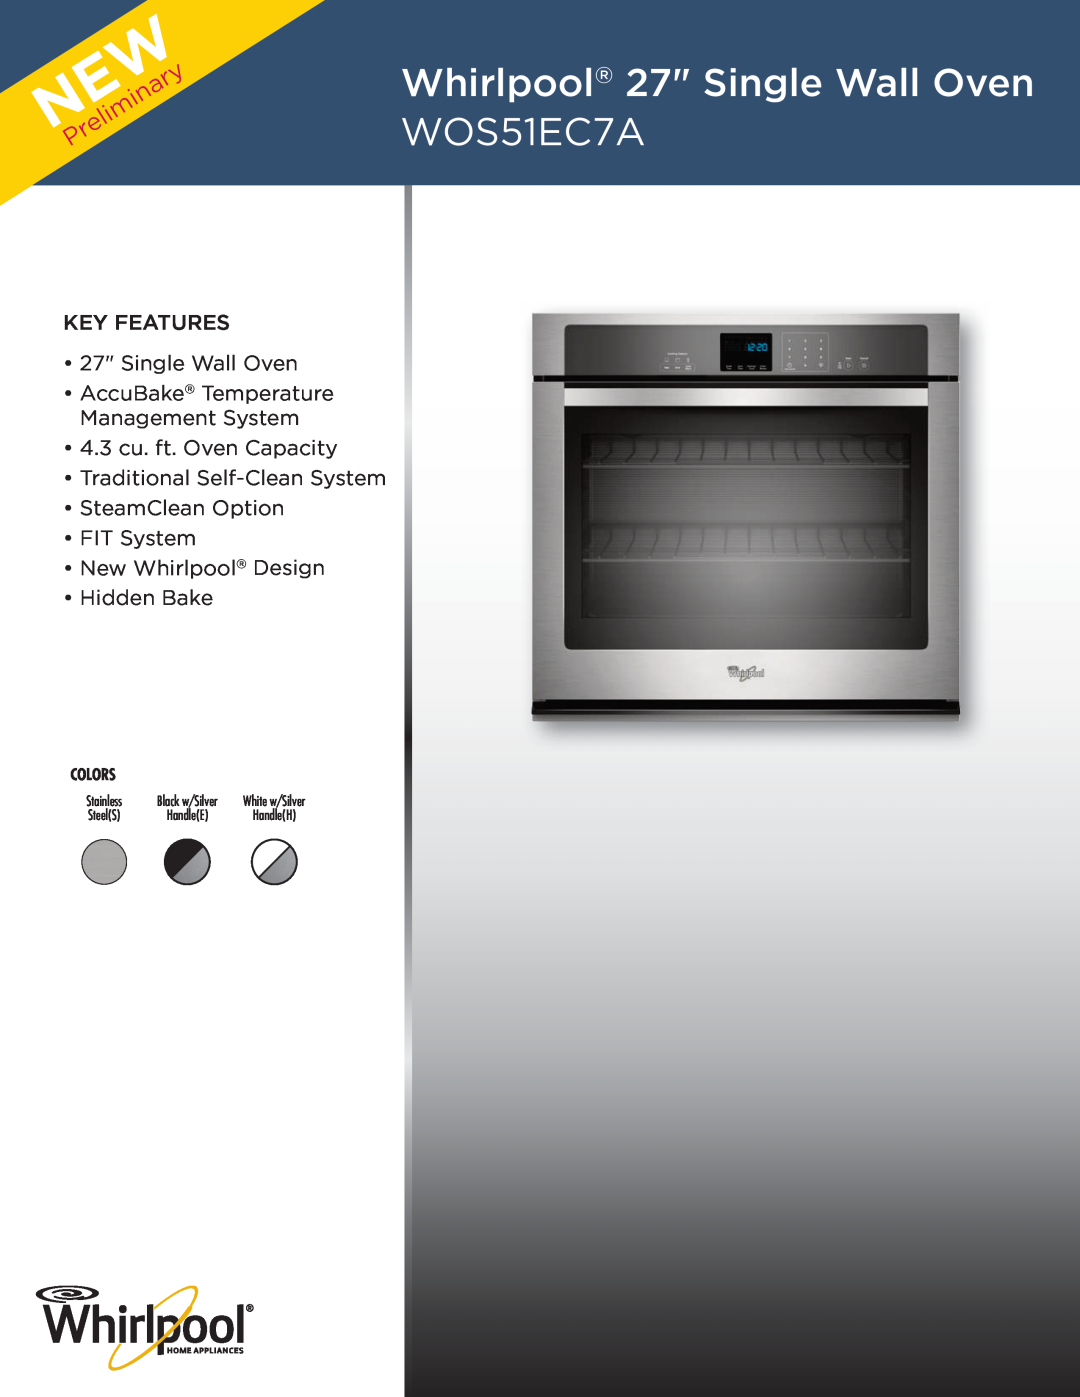 Whirlpool WOS51EC0A Whirlpool 27 Single Wall Oven WOS51EC7A, key features 27 Single Wall Oven, NEWPreliminary, Colors 